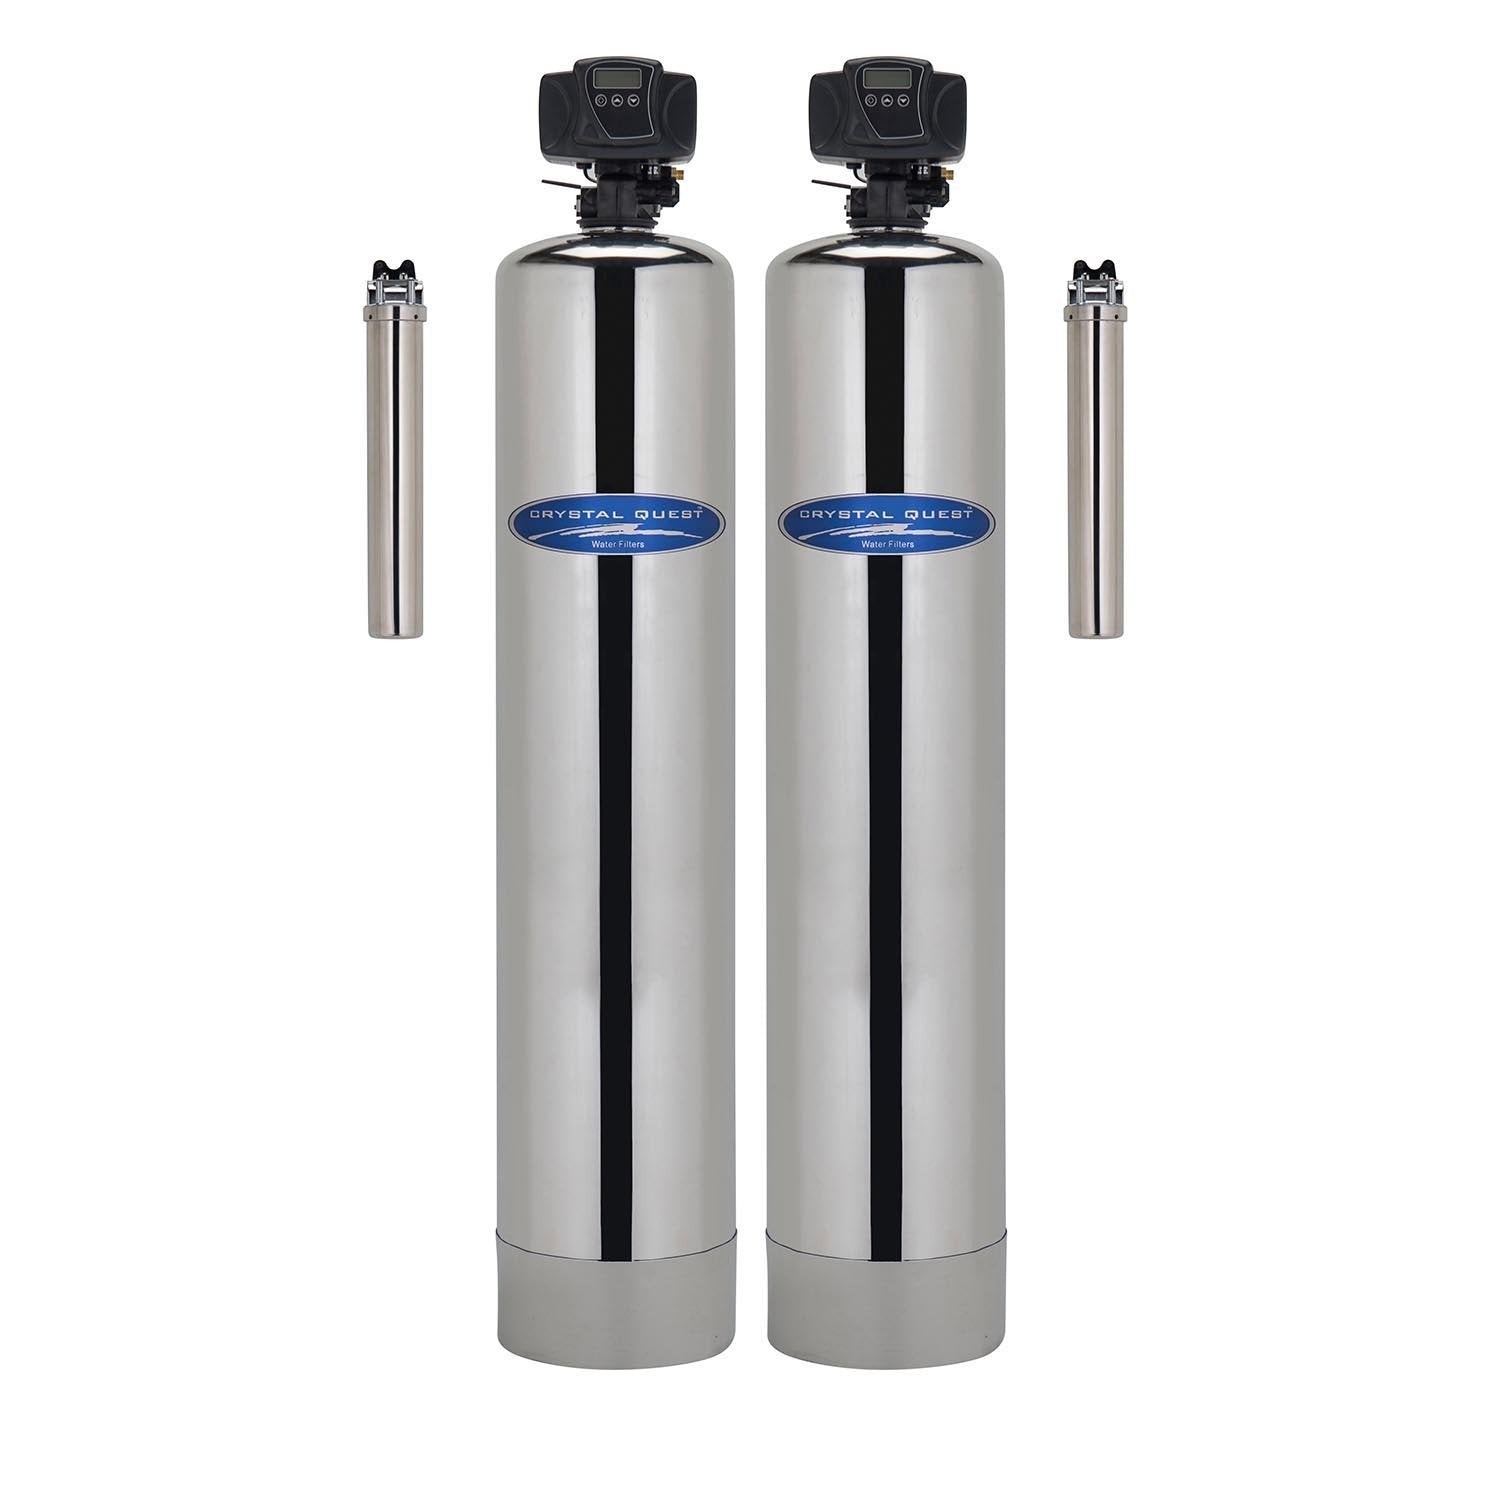 Add SMART Filter / Stainless Steel / 1.5 Iron Whole House Water Filter - Whole House Water Filters - Crystal Quest